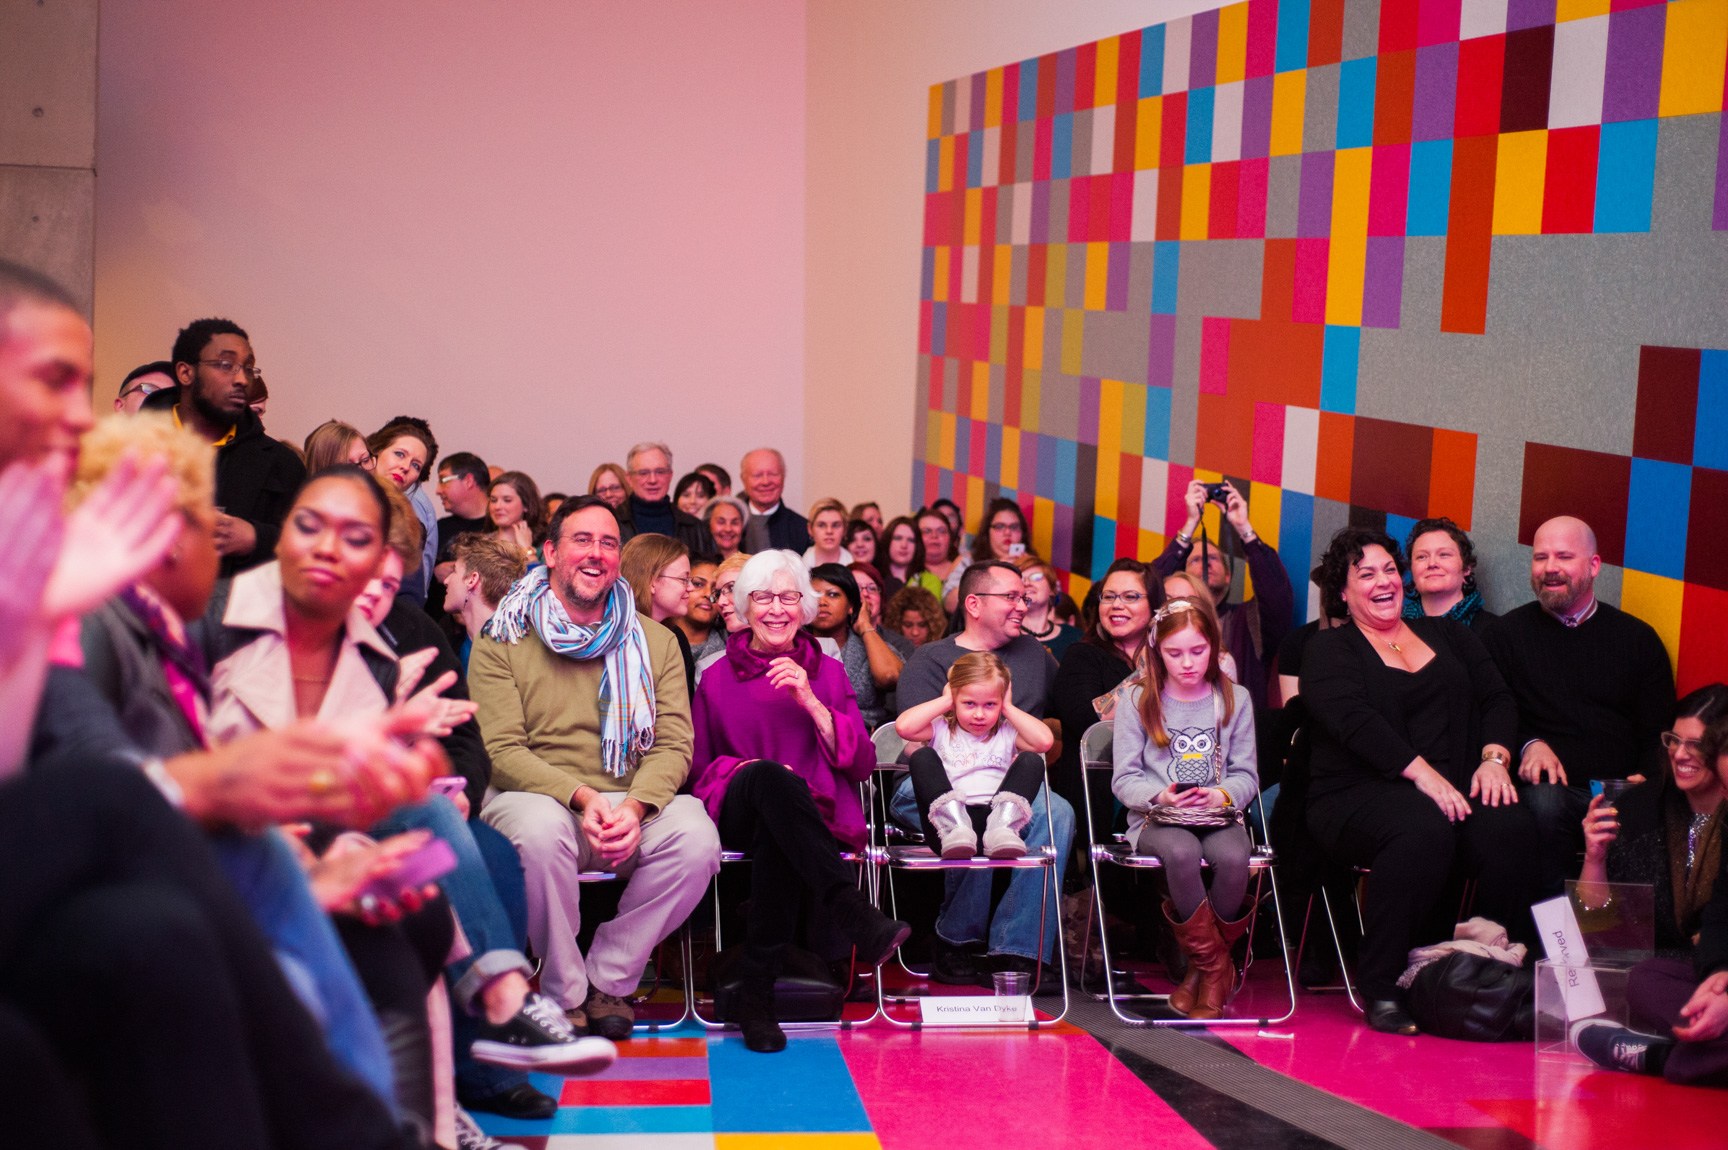 A packed audience in the Main Gallery attends the drag performance, with David Scanavino's installation "Candy Crush" next to them.